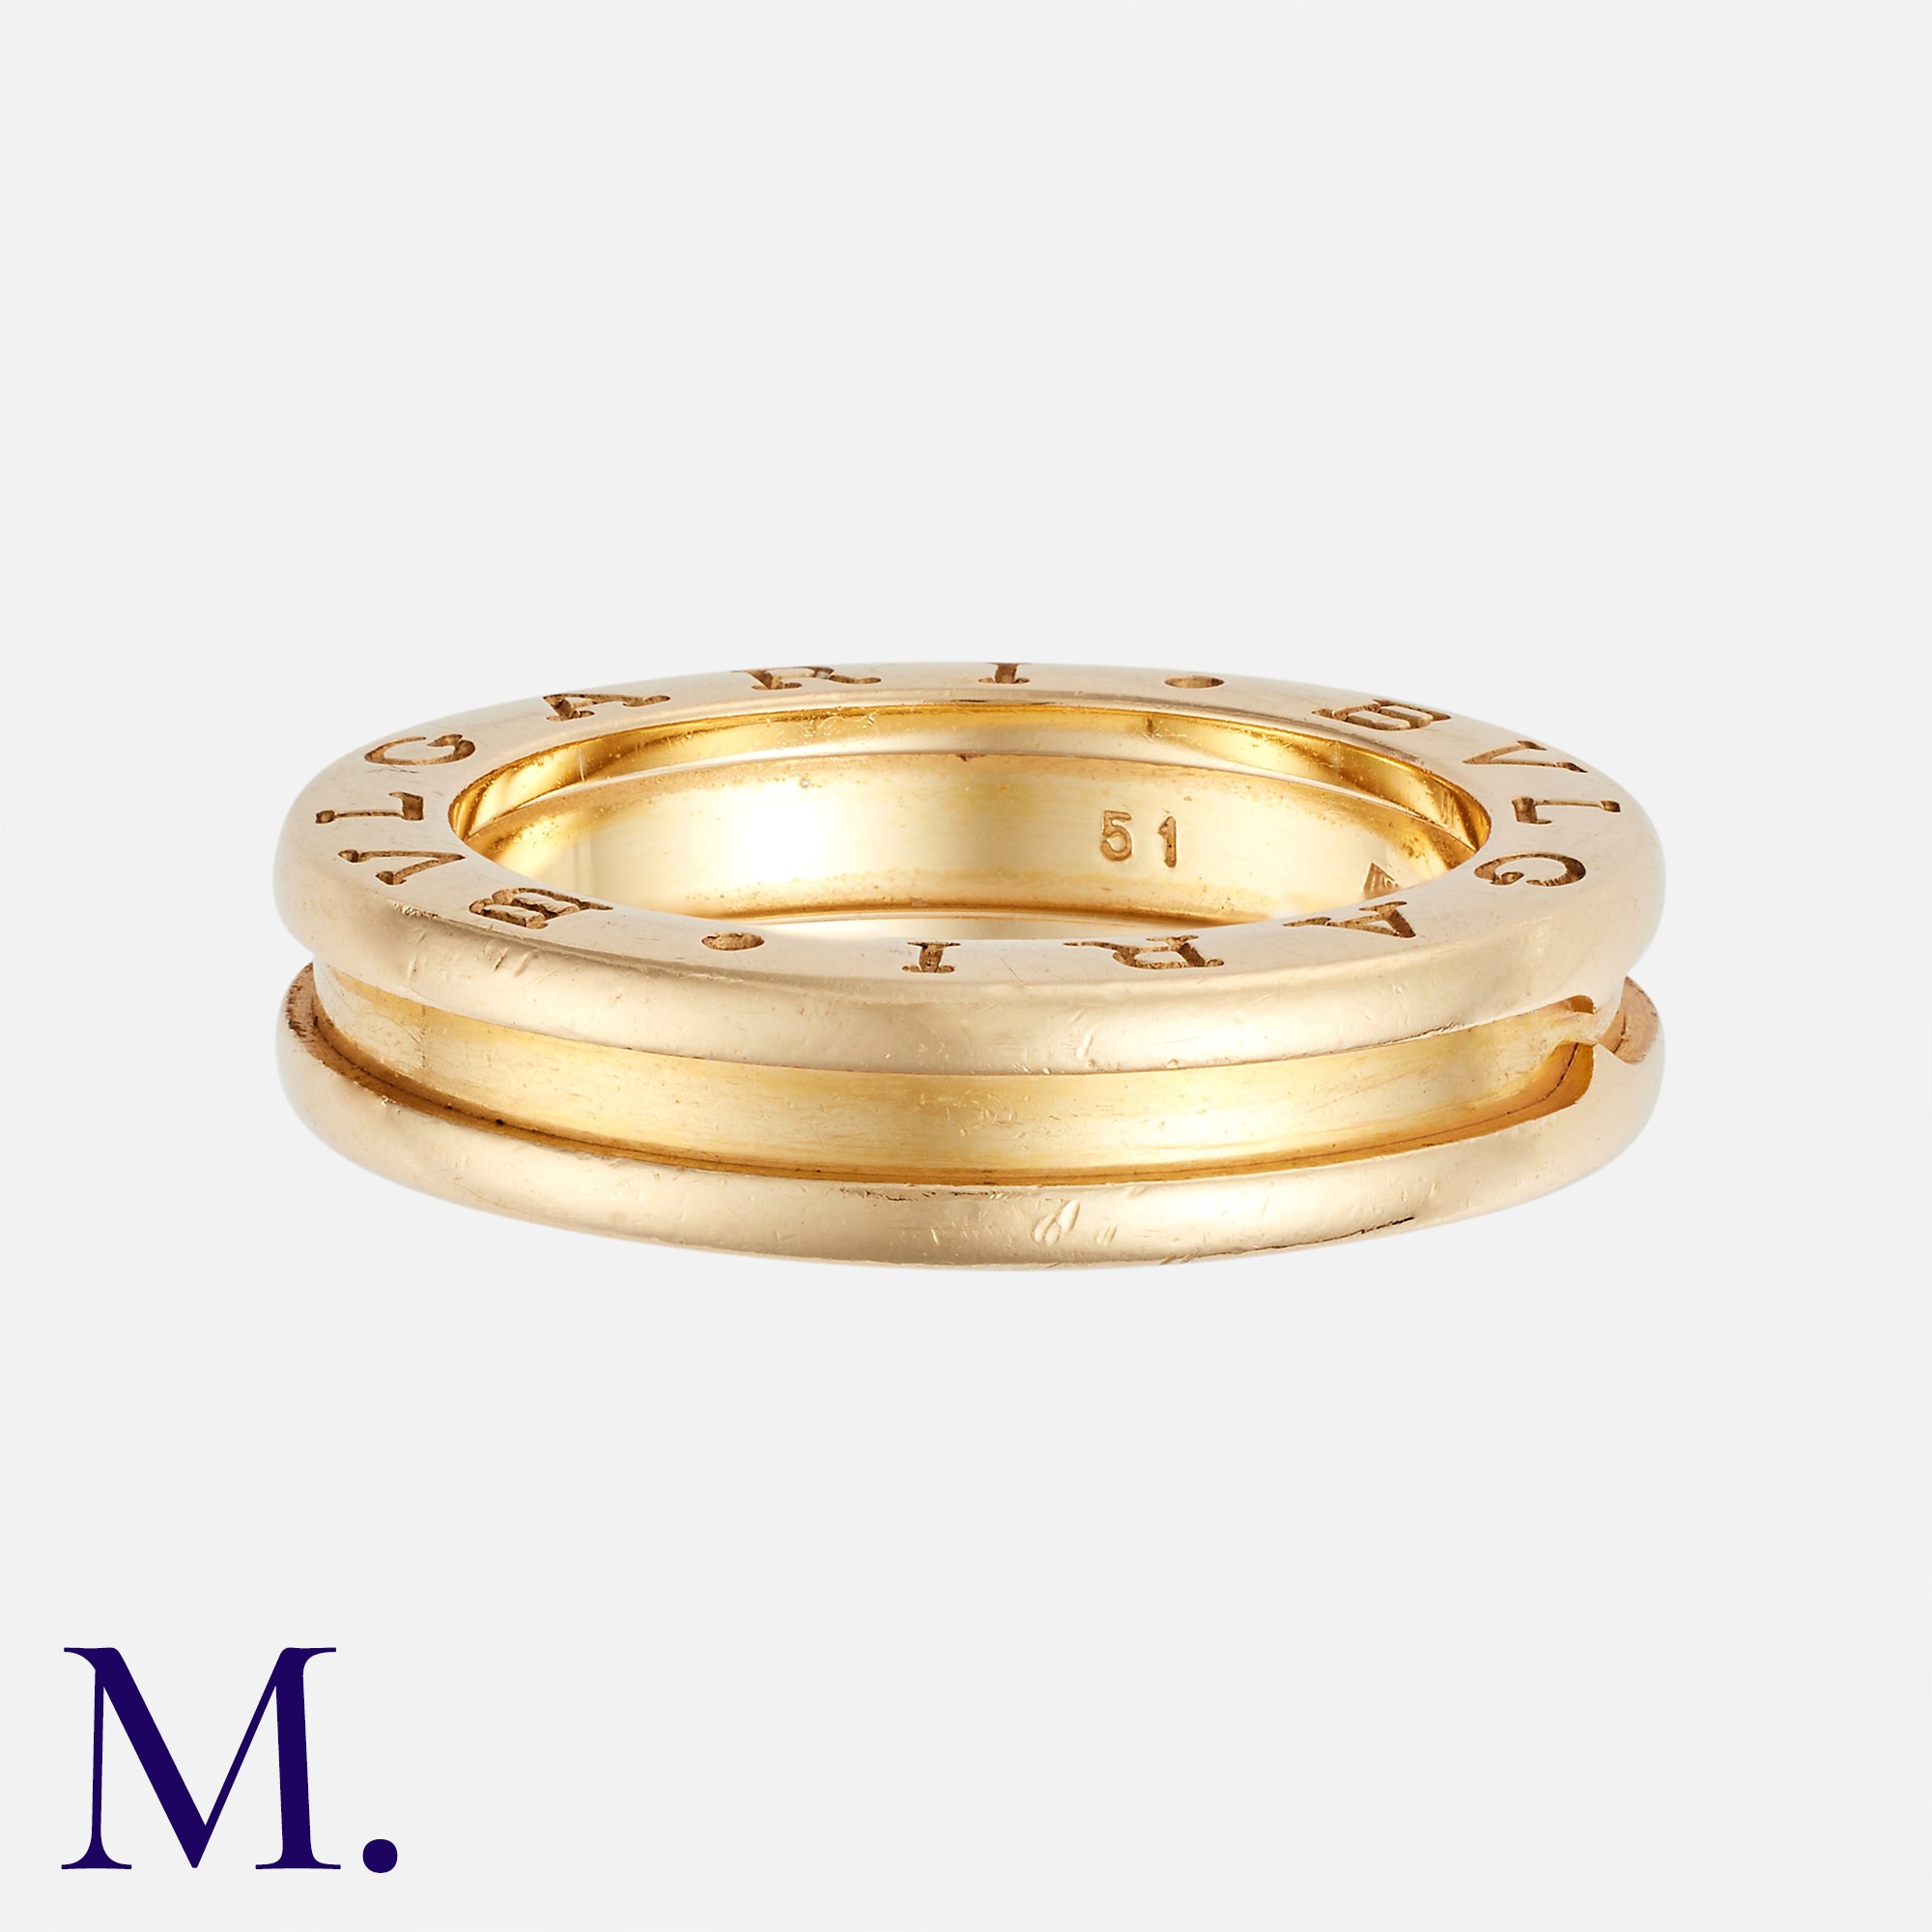 BULGARI. A B.Zero1 1-Band Ring in 18K yellow gold. Signed Bulgari and marked for 18ct gold. Size: